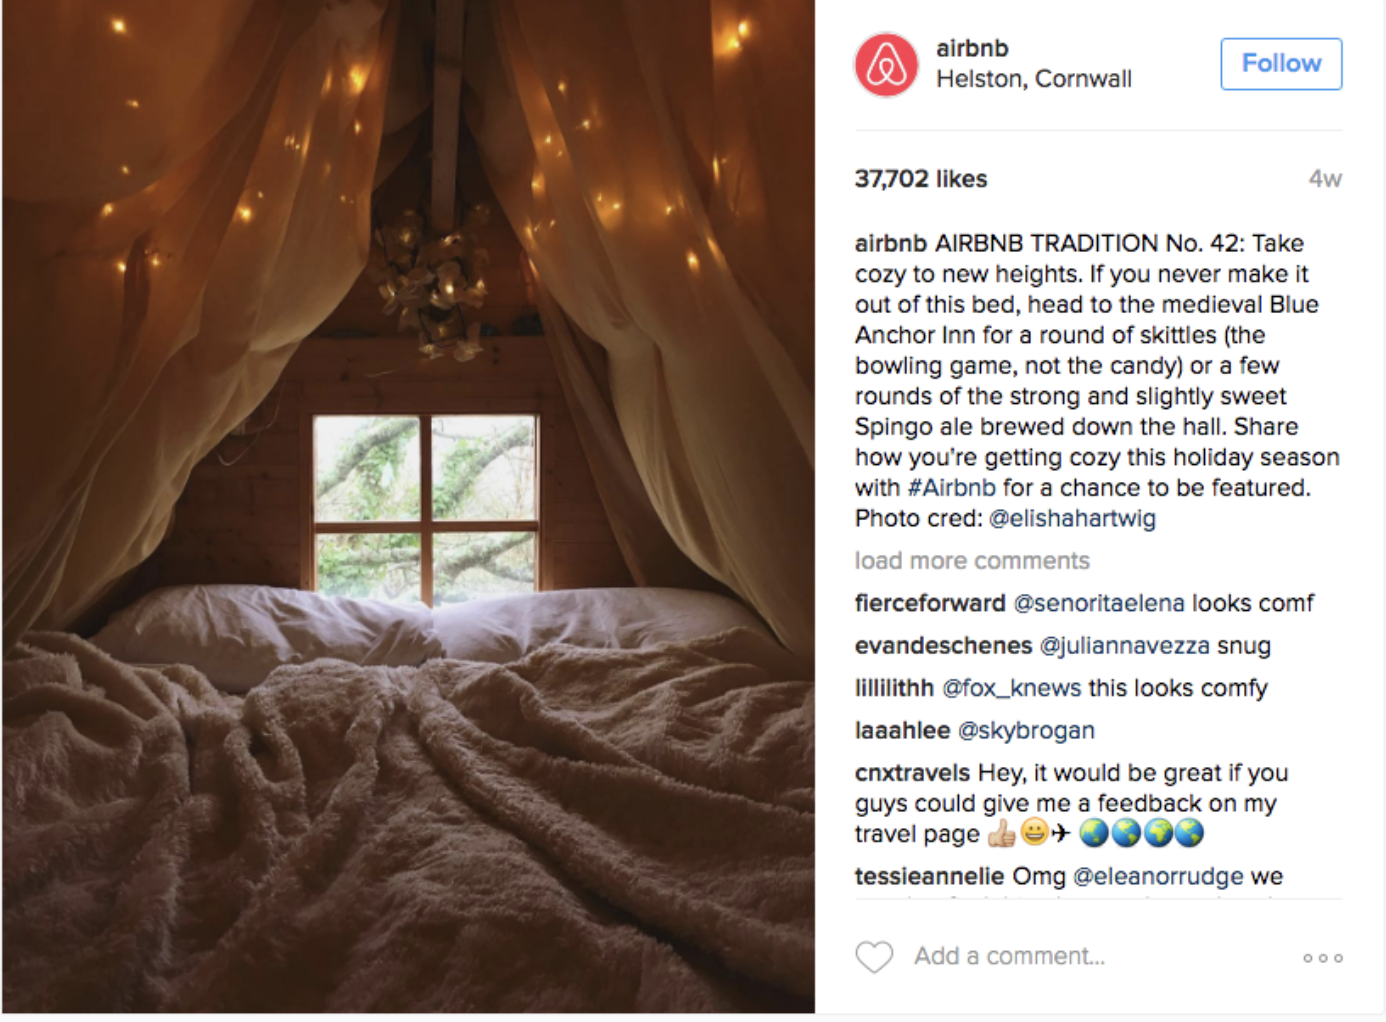 Airbnb's Instagram UGC post sourced from the community